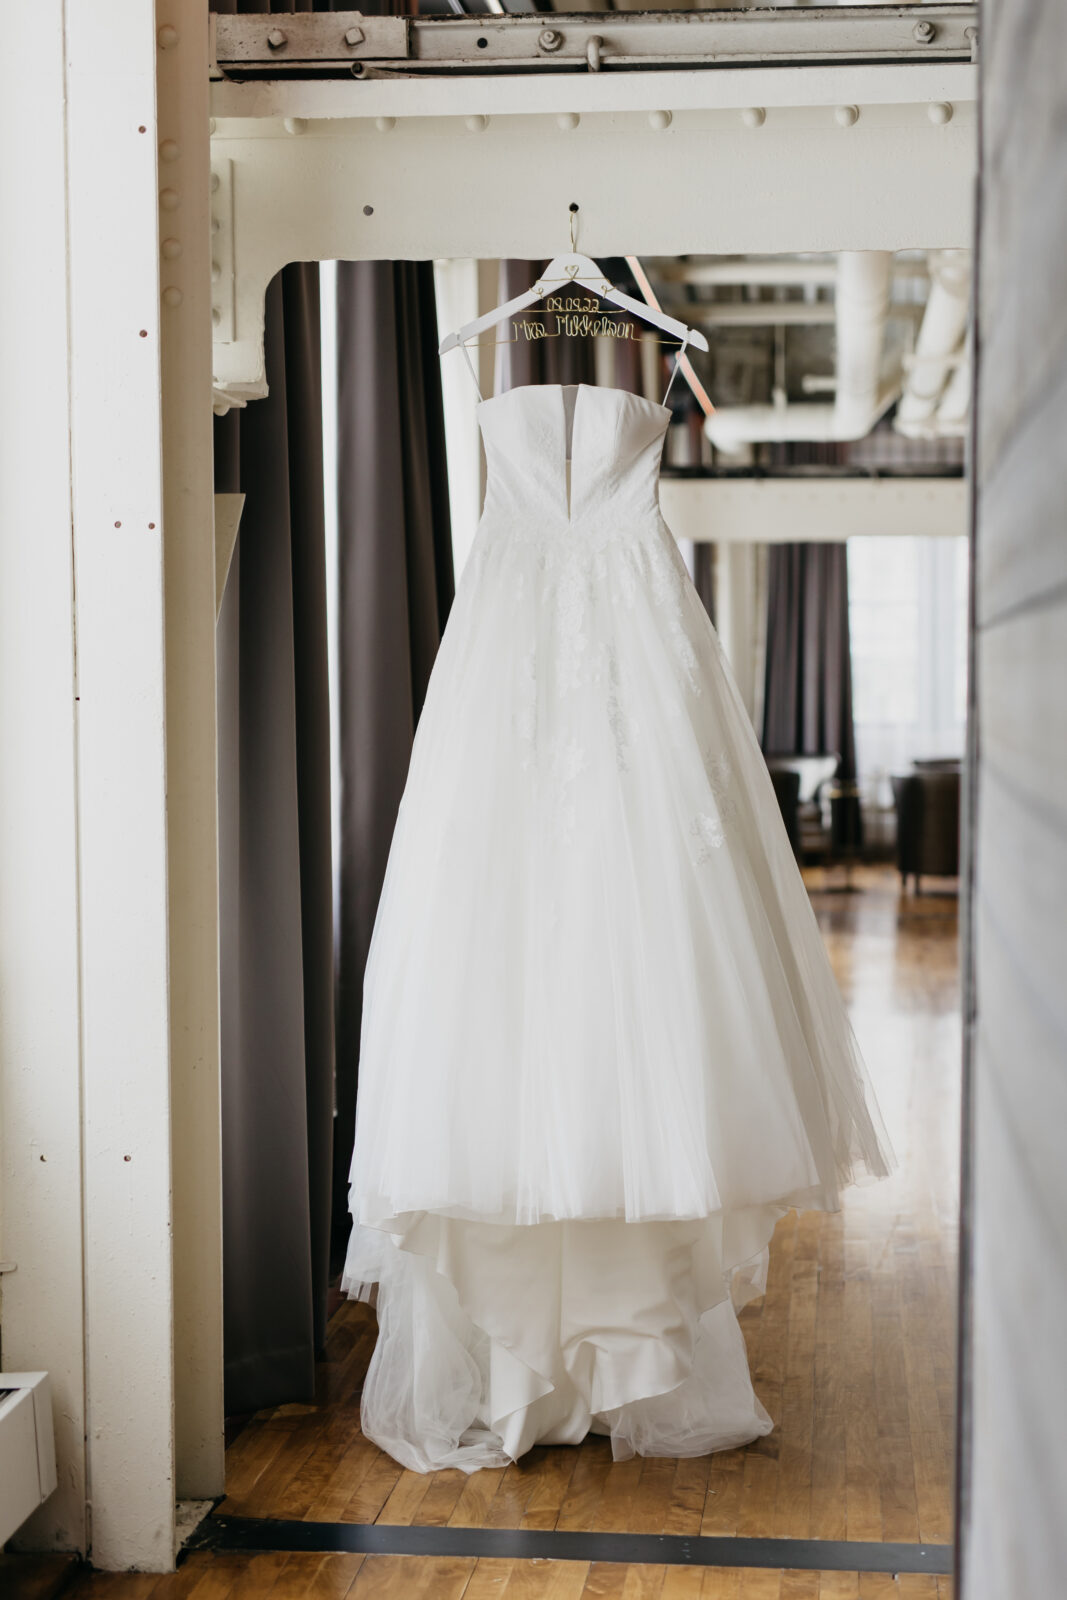 A photo of the bride's white gown